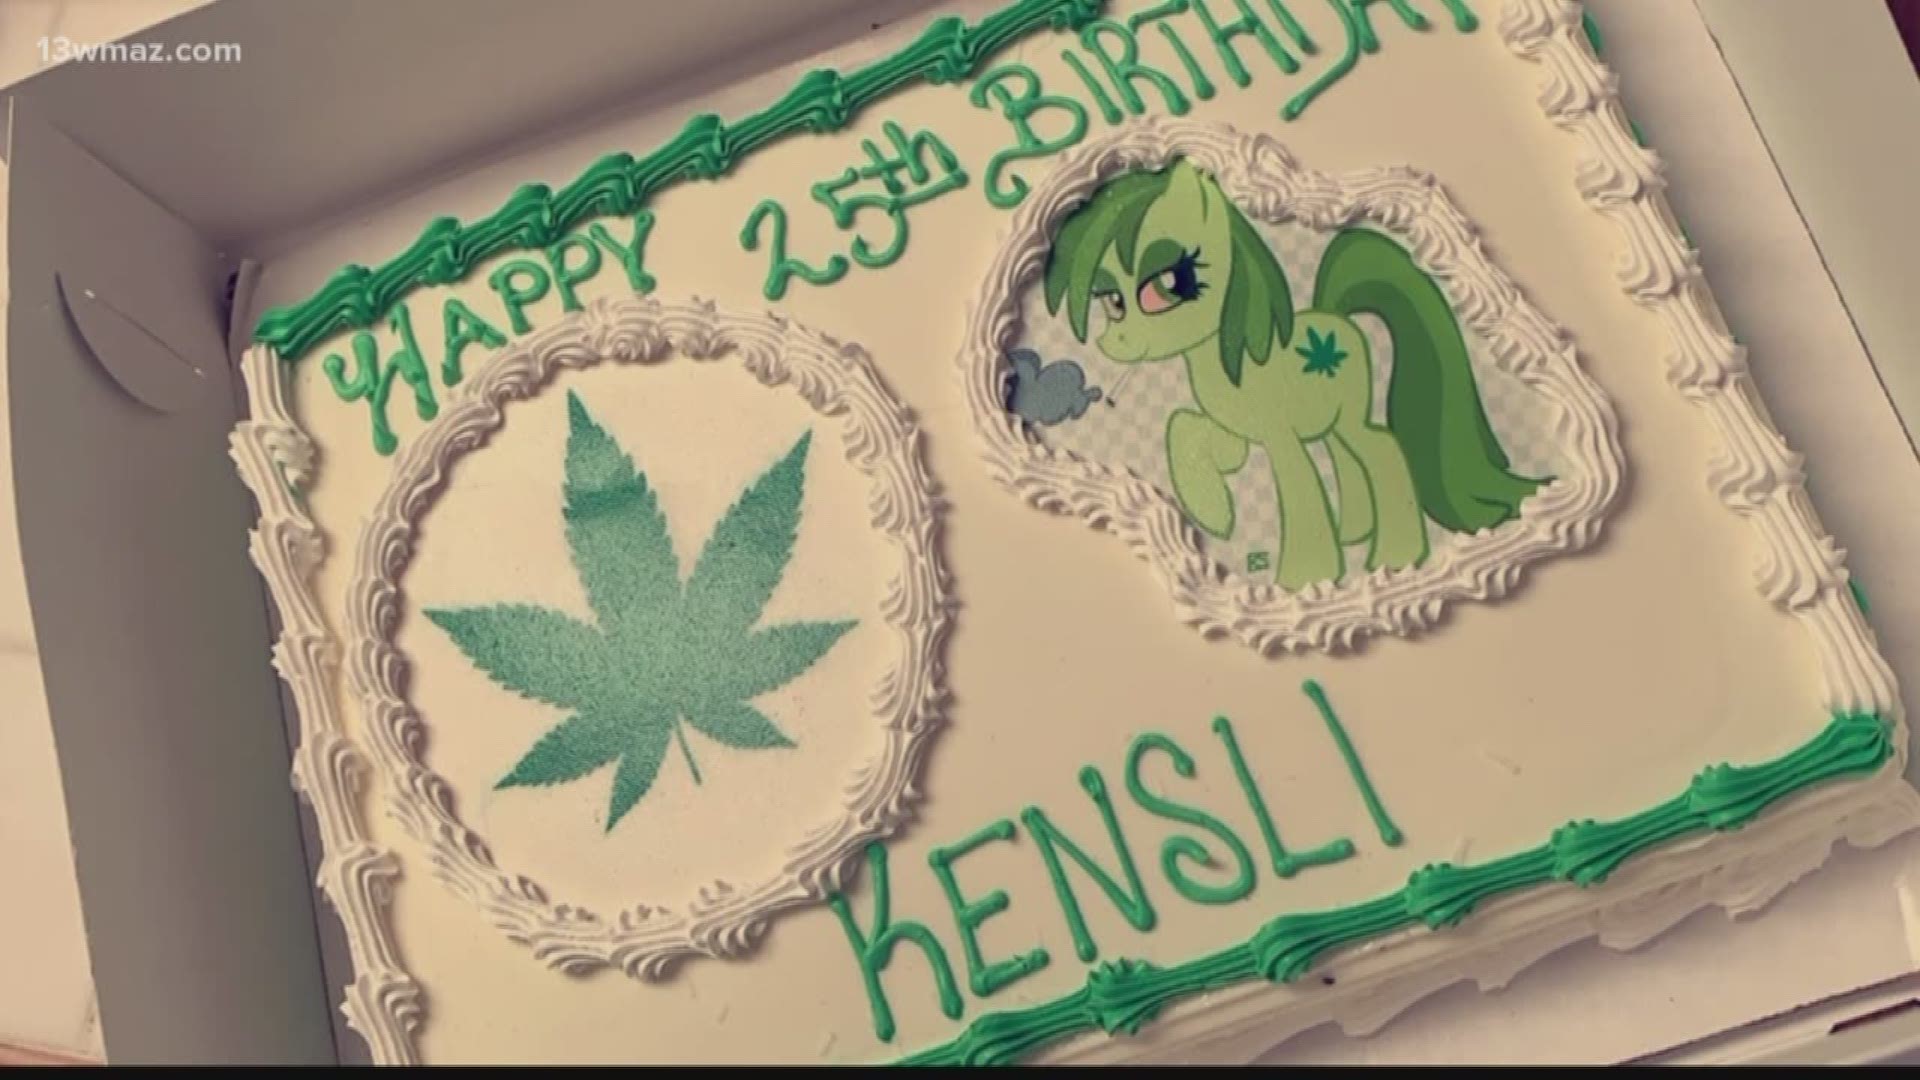 A miscommunication resulted in an unusual birthday cake for a Milledgeville woman. Kensli Davis is a huge fan of Disney's animated movie, "Moana." When her mother ordered a cake for the celebration, they were surprised to see the cake decorated with marijuana.